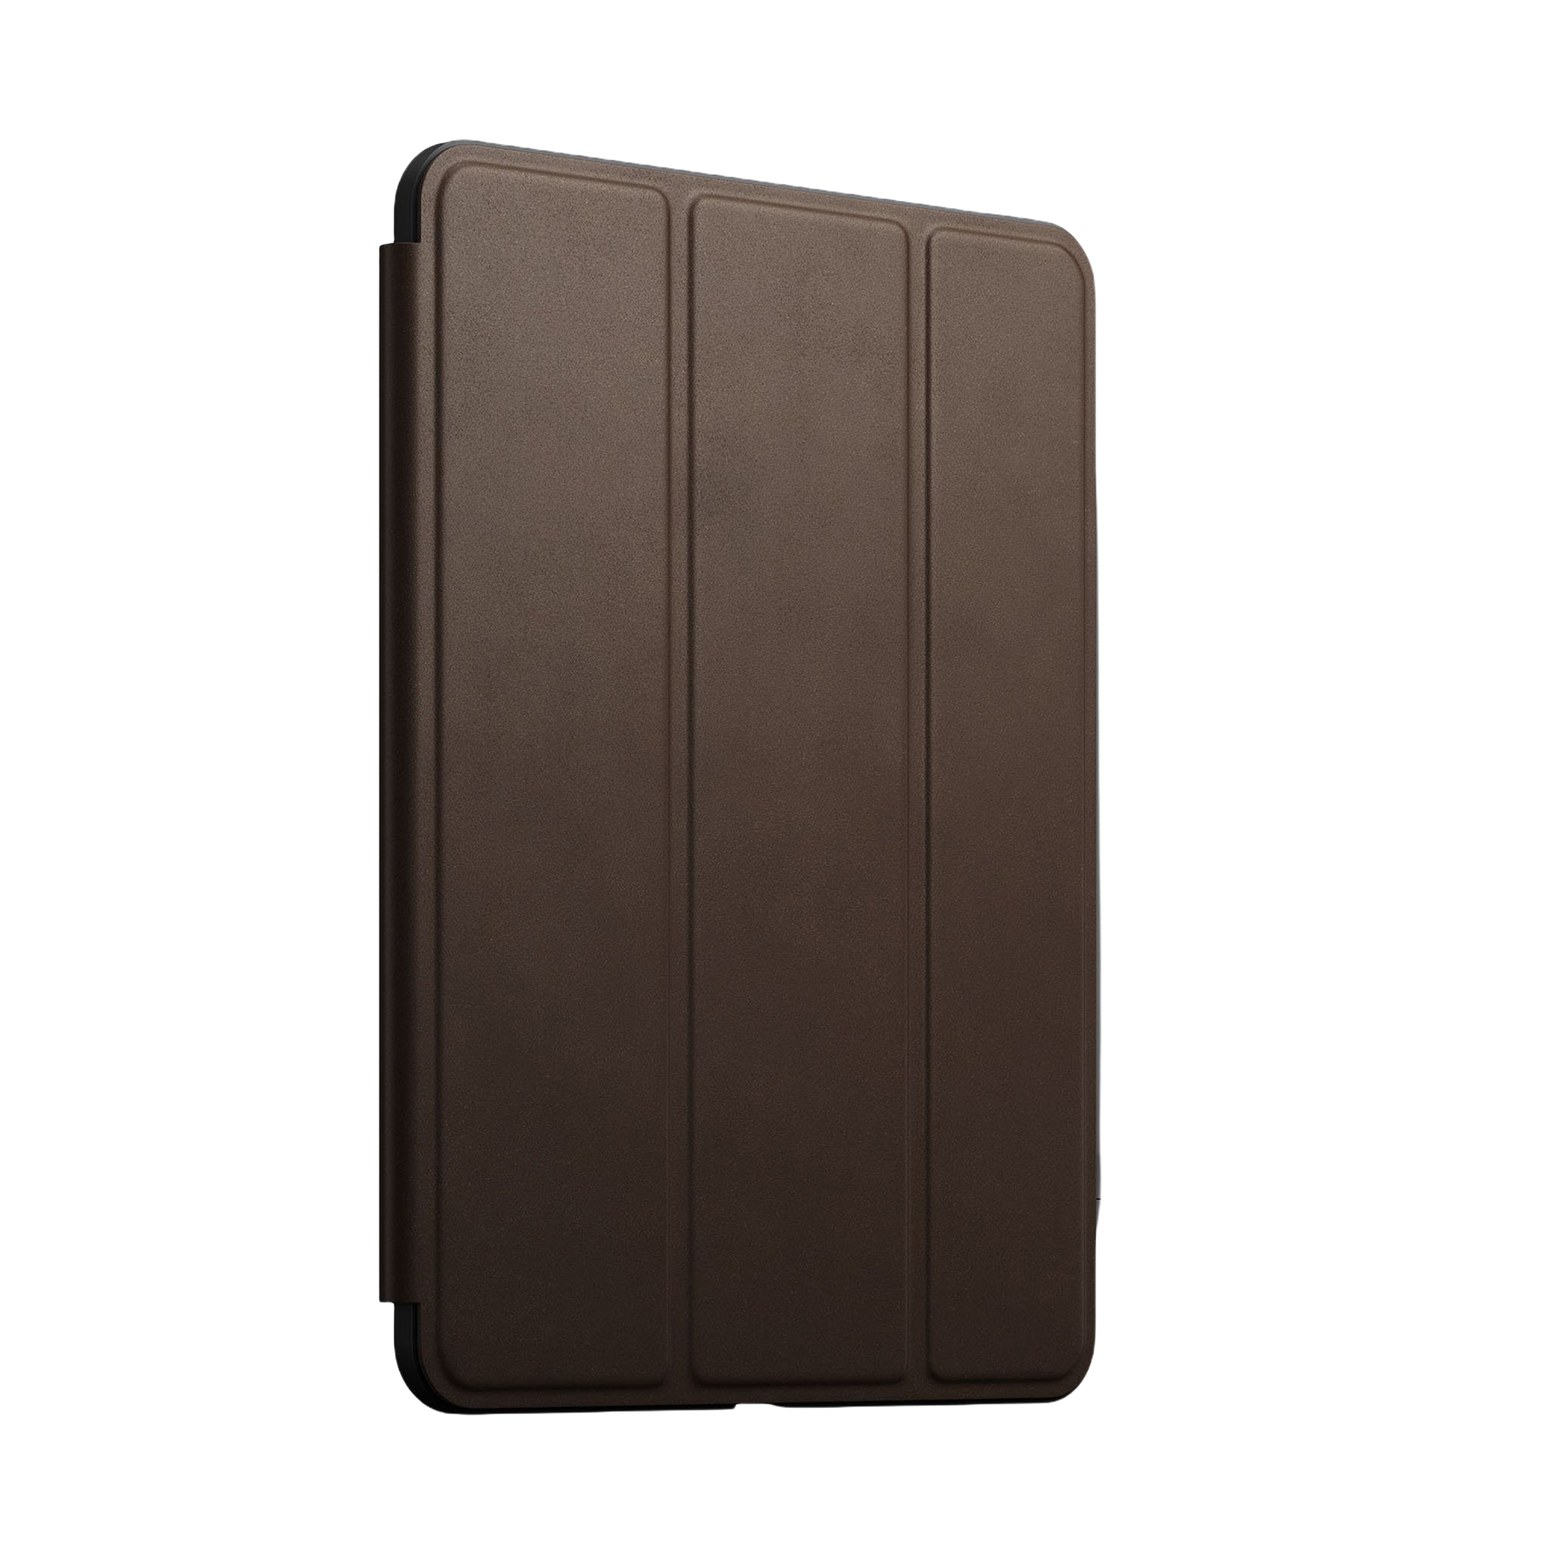 Nomad Rugged Folio for iPad Pro 11" (2nd Gen) - Horween Leather - Rustic Brown